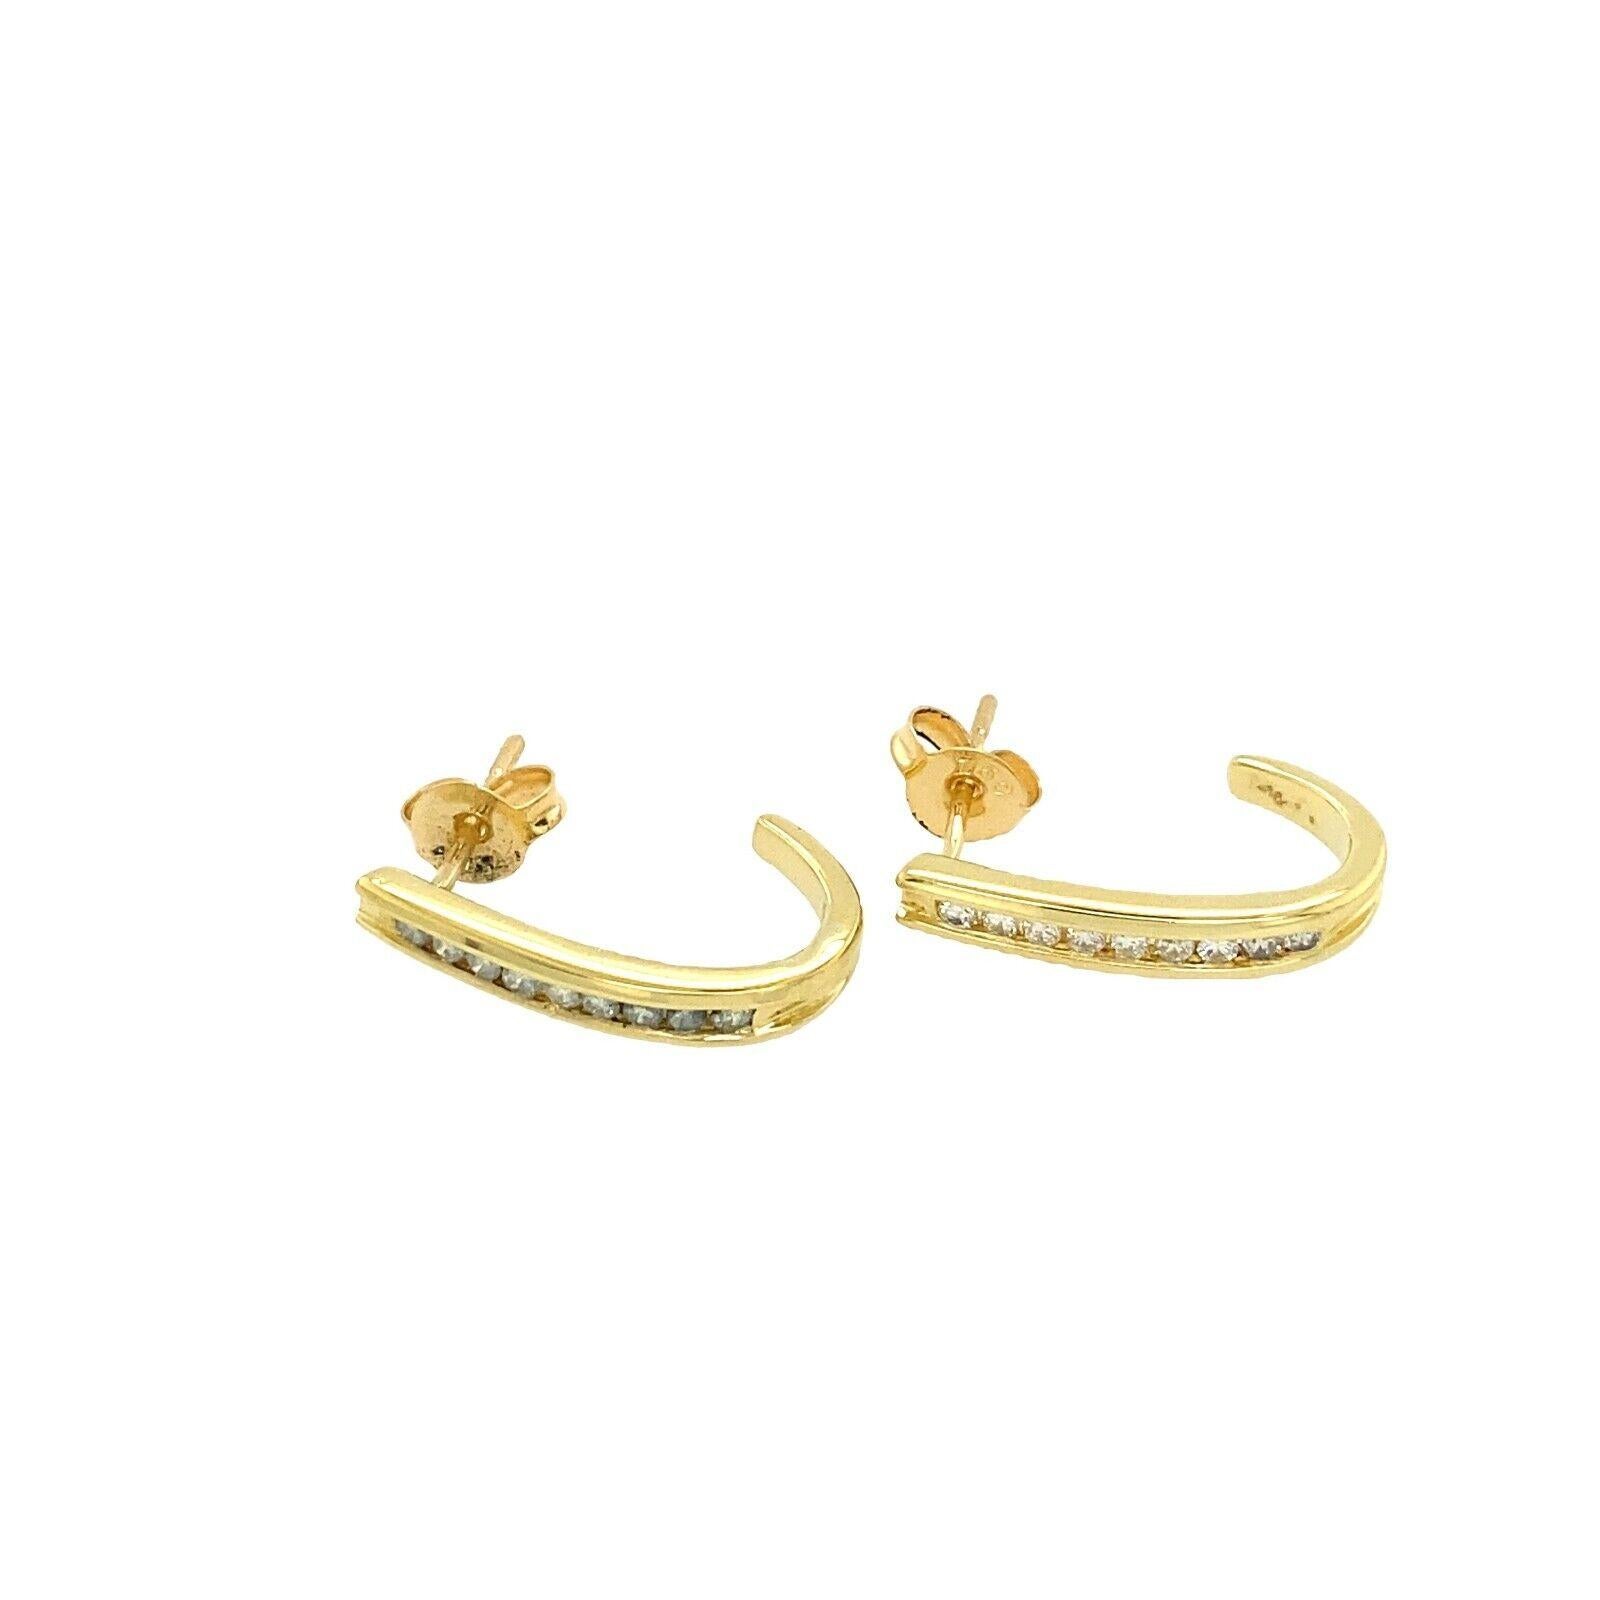 The earrings are a great choice for women who love to wear jewellery that is both classy and elegant. This pair is set in 18ct yellow gold set in 0.25ct of round brilliant cut diamonds.

Additional Information:
Total Diamond Weight: 0.25ct
Diamond